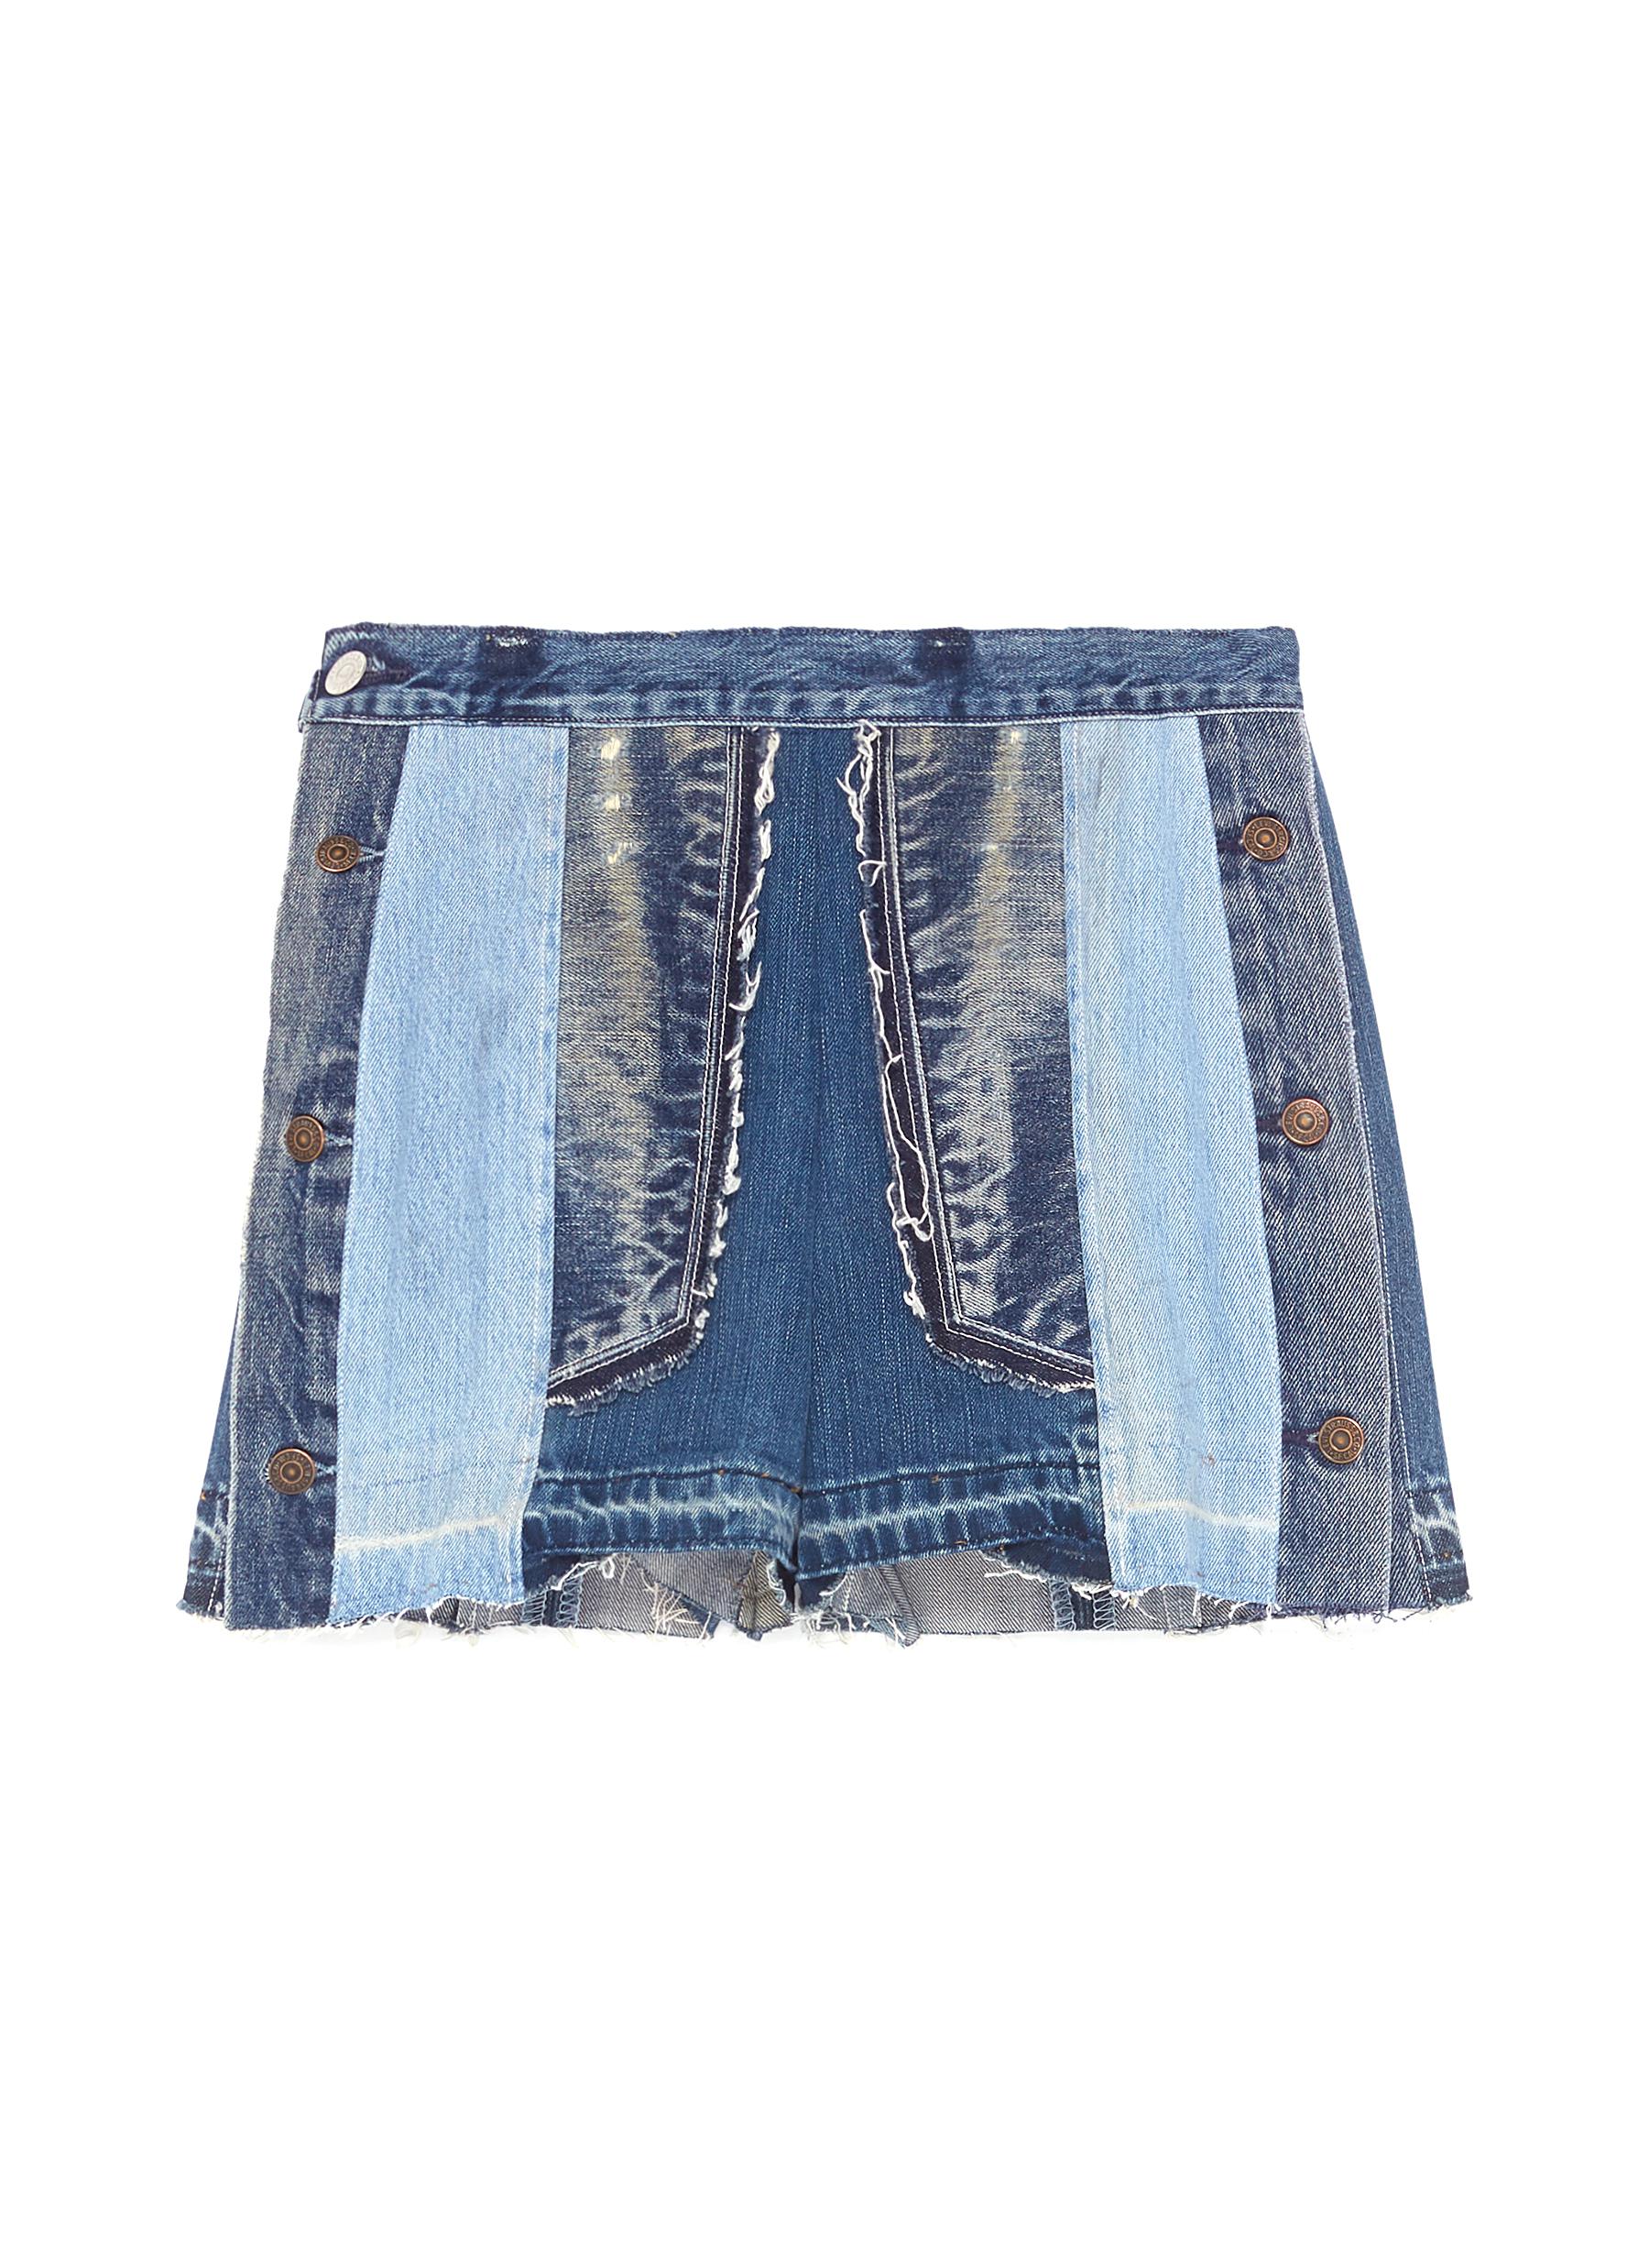 Button outseam frayed patchwork denim shorts by Atelier Reservé